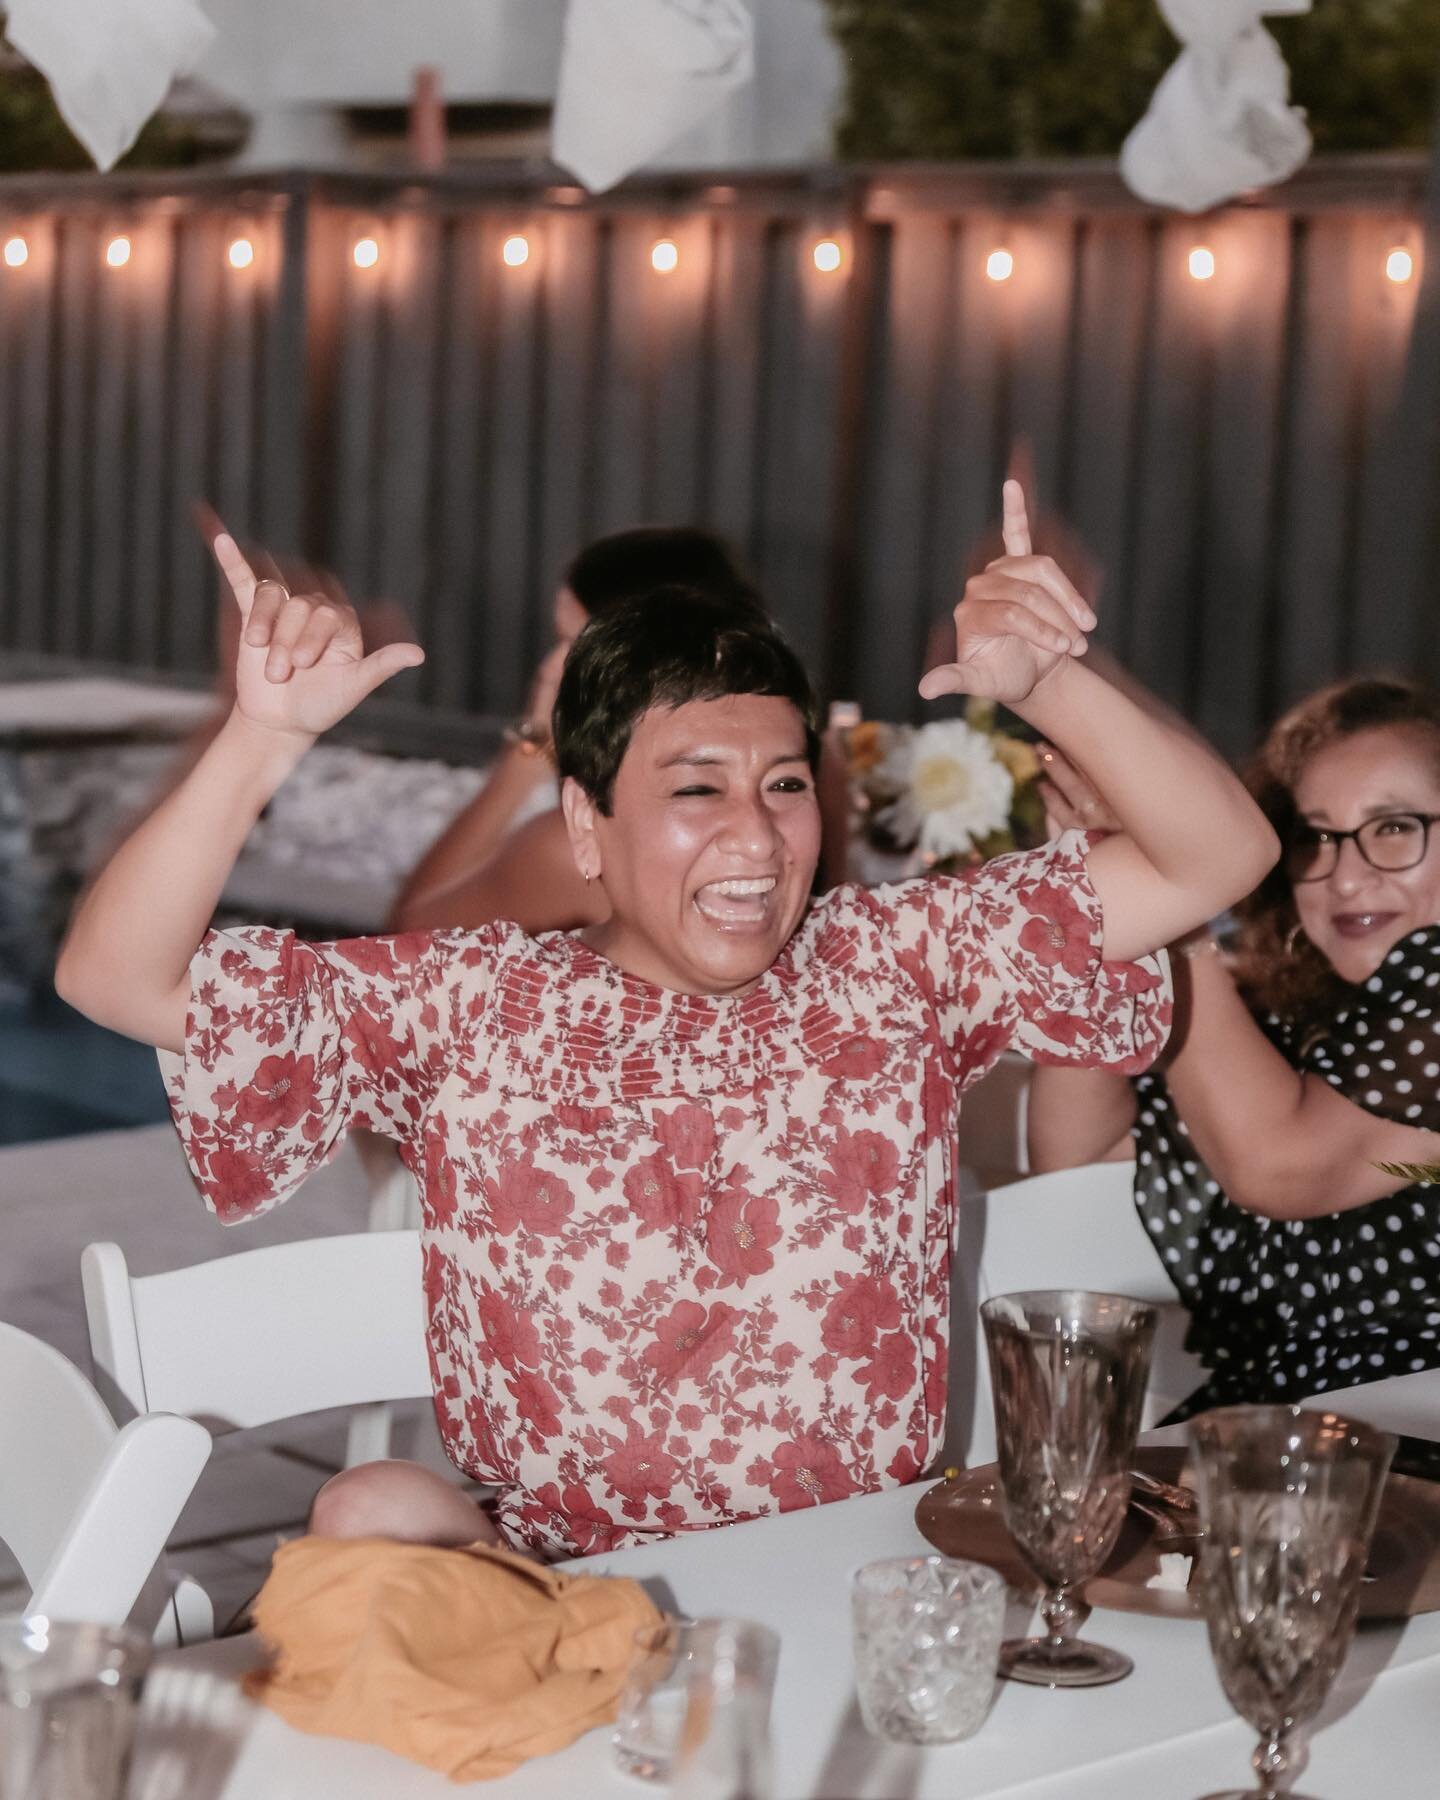 #MOOD - when the wedding day is finally over and you the drinks start hitting! Cheers to our favorite day of the week 🍻